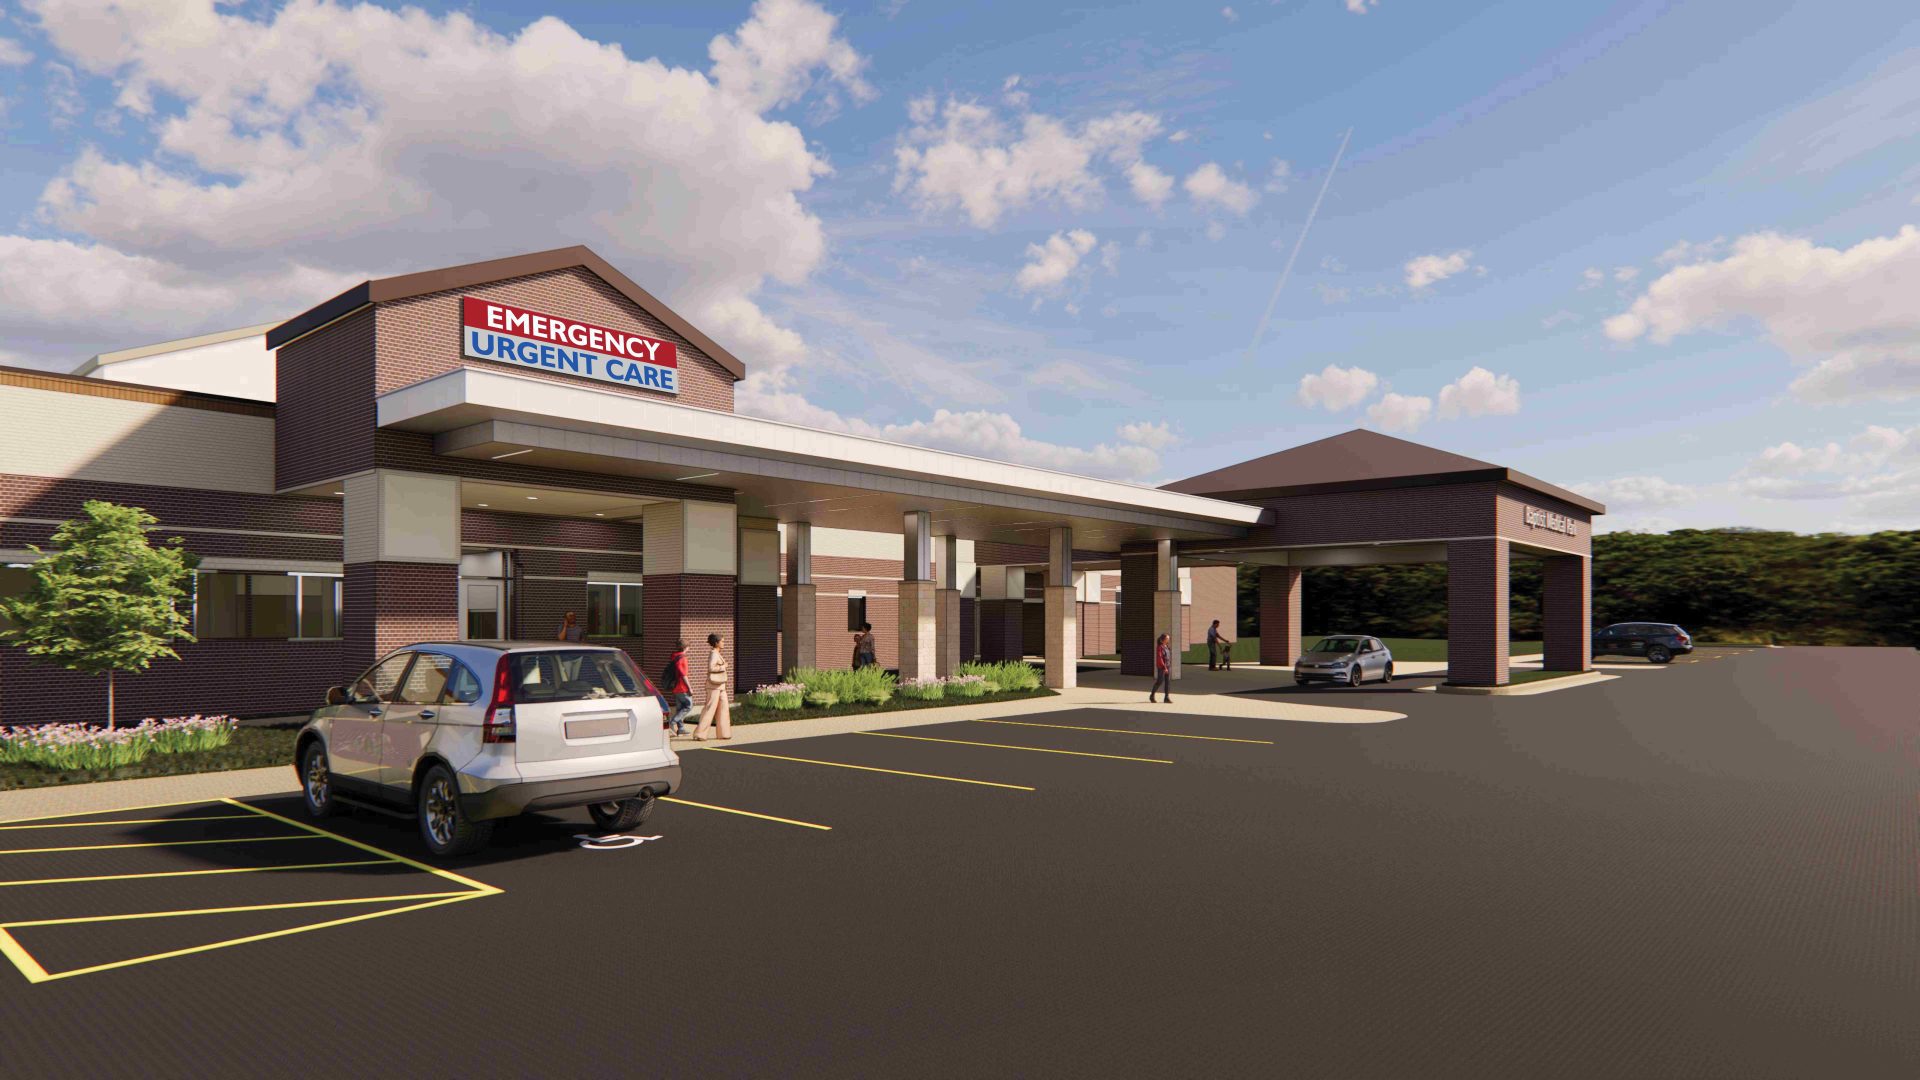 Rendering of Baptist Hospitals combined emergency room and urgent care building